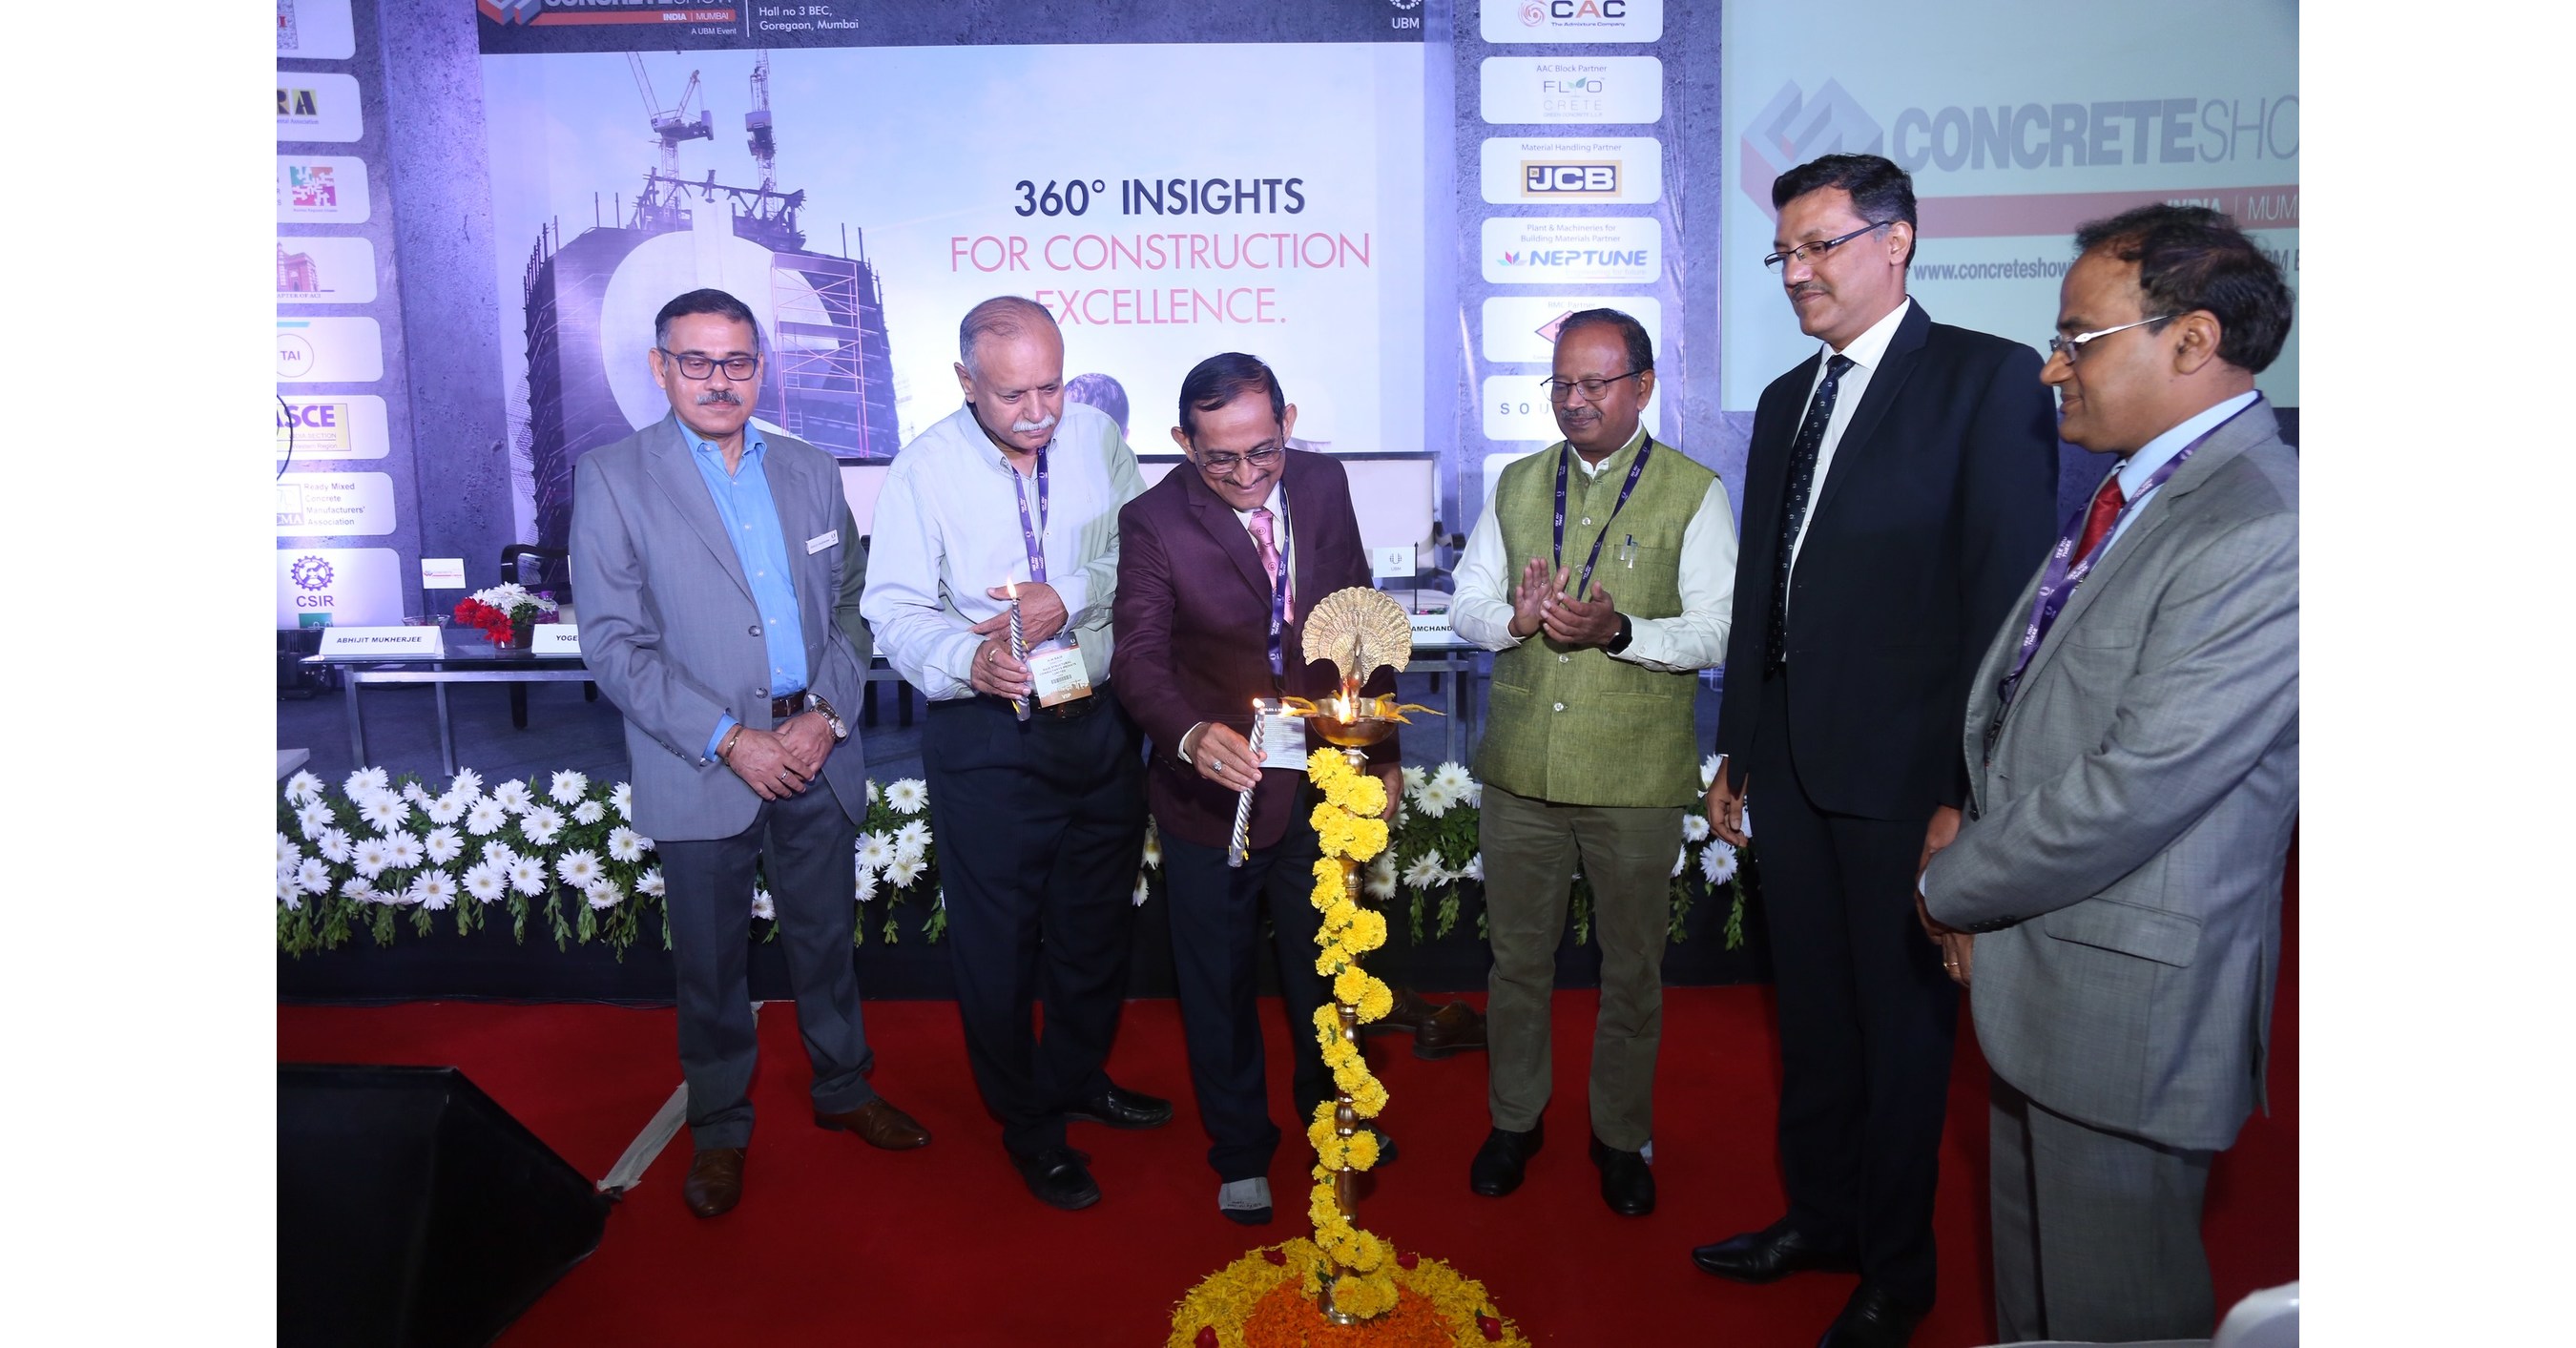 7th Edition of Concrete Show India Commences in Mumbai